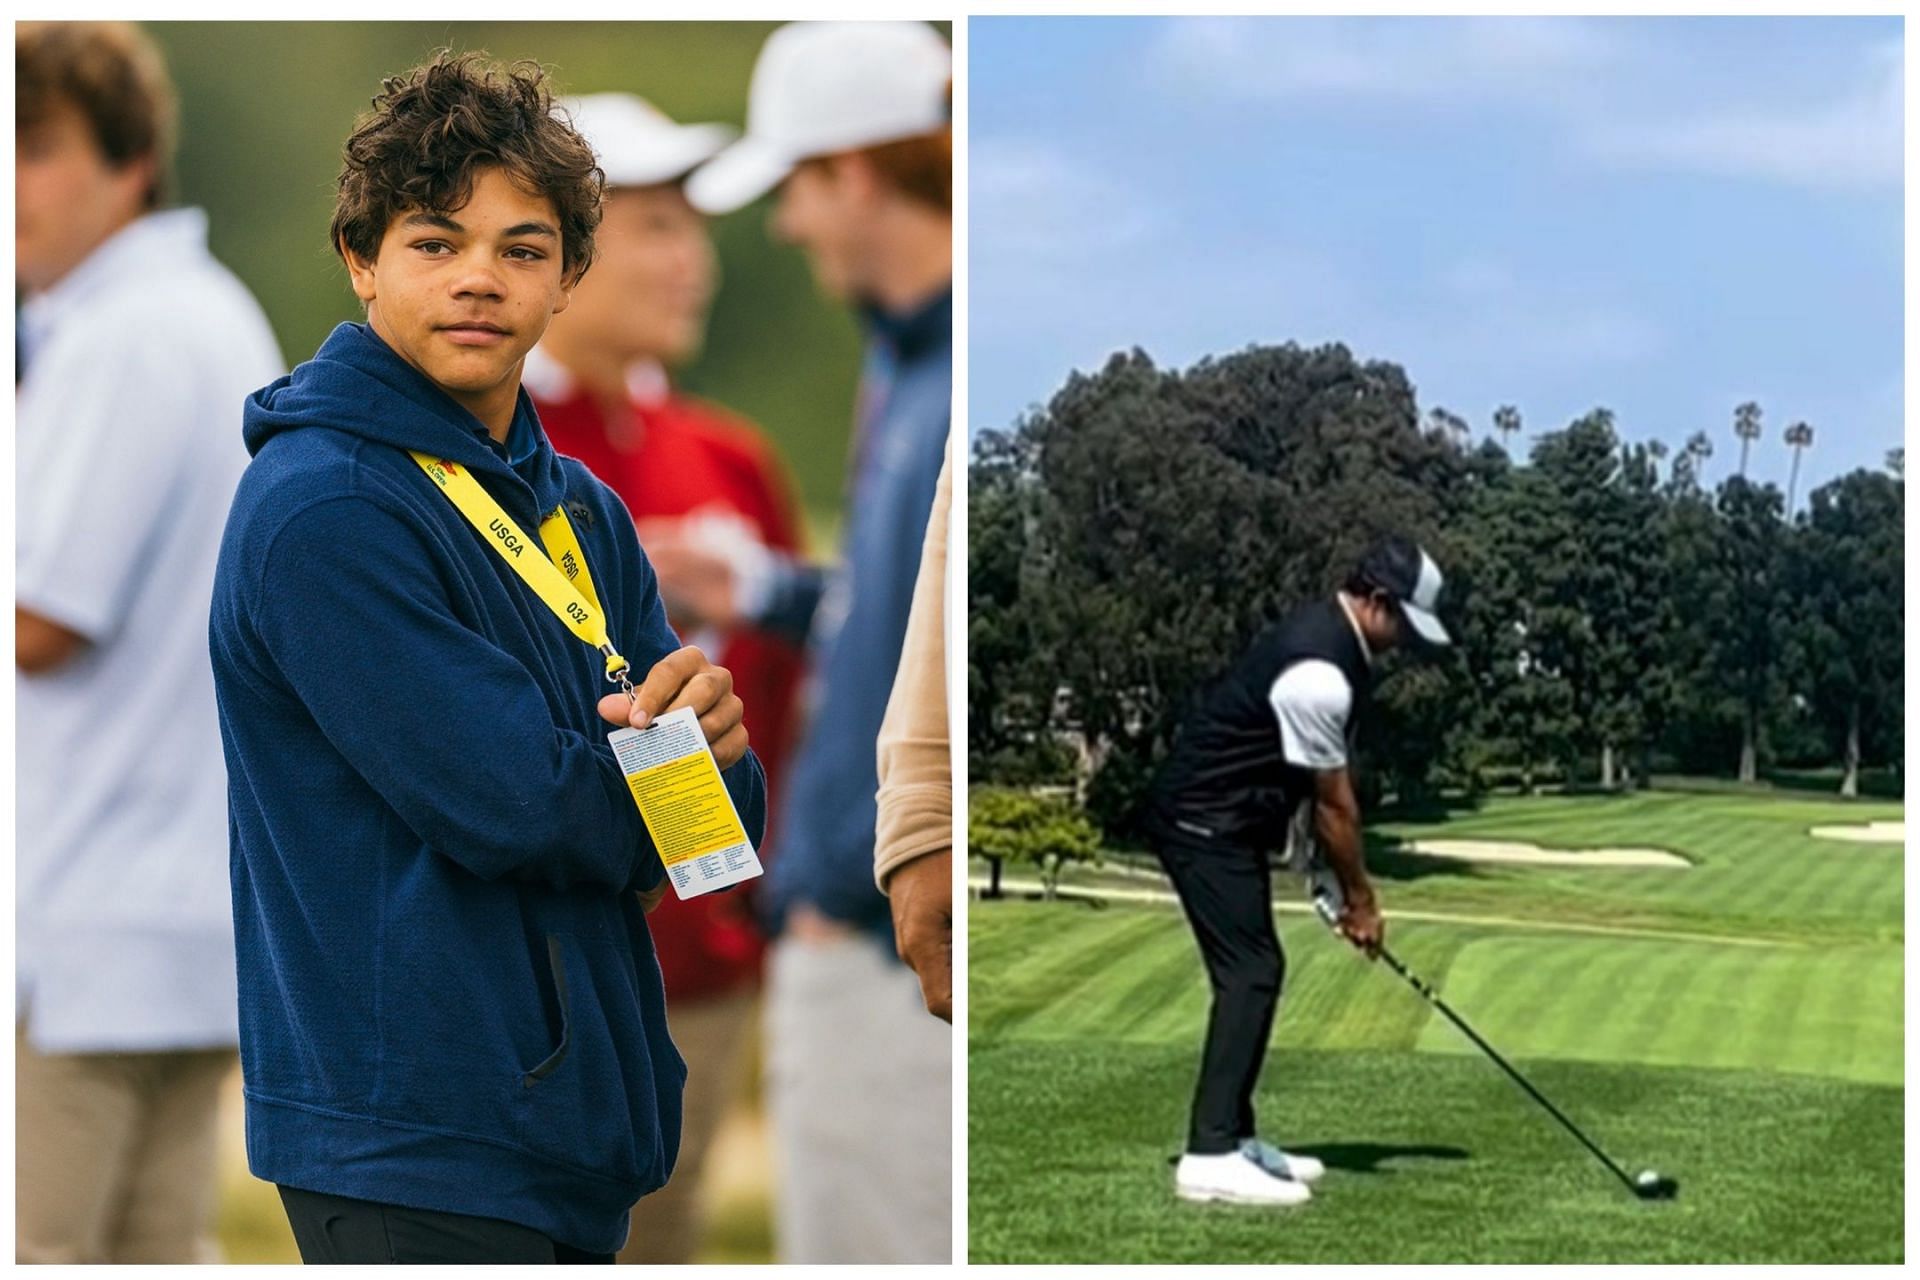 Charlie Woods spotted at the US Open 2023, no trace of Tiger